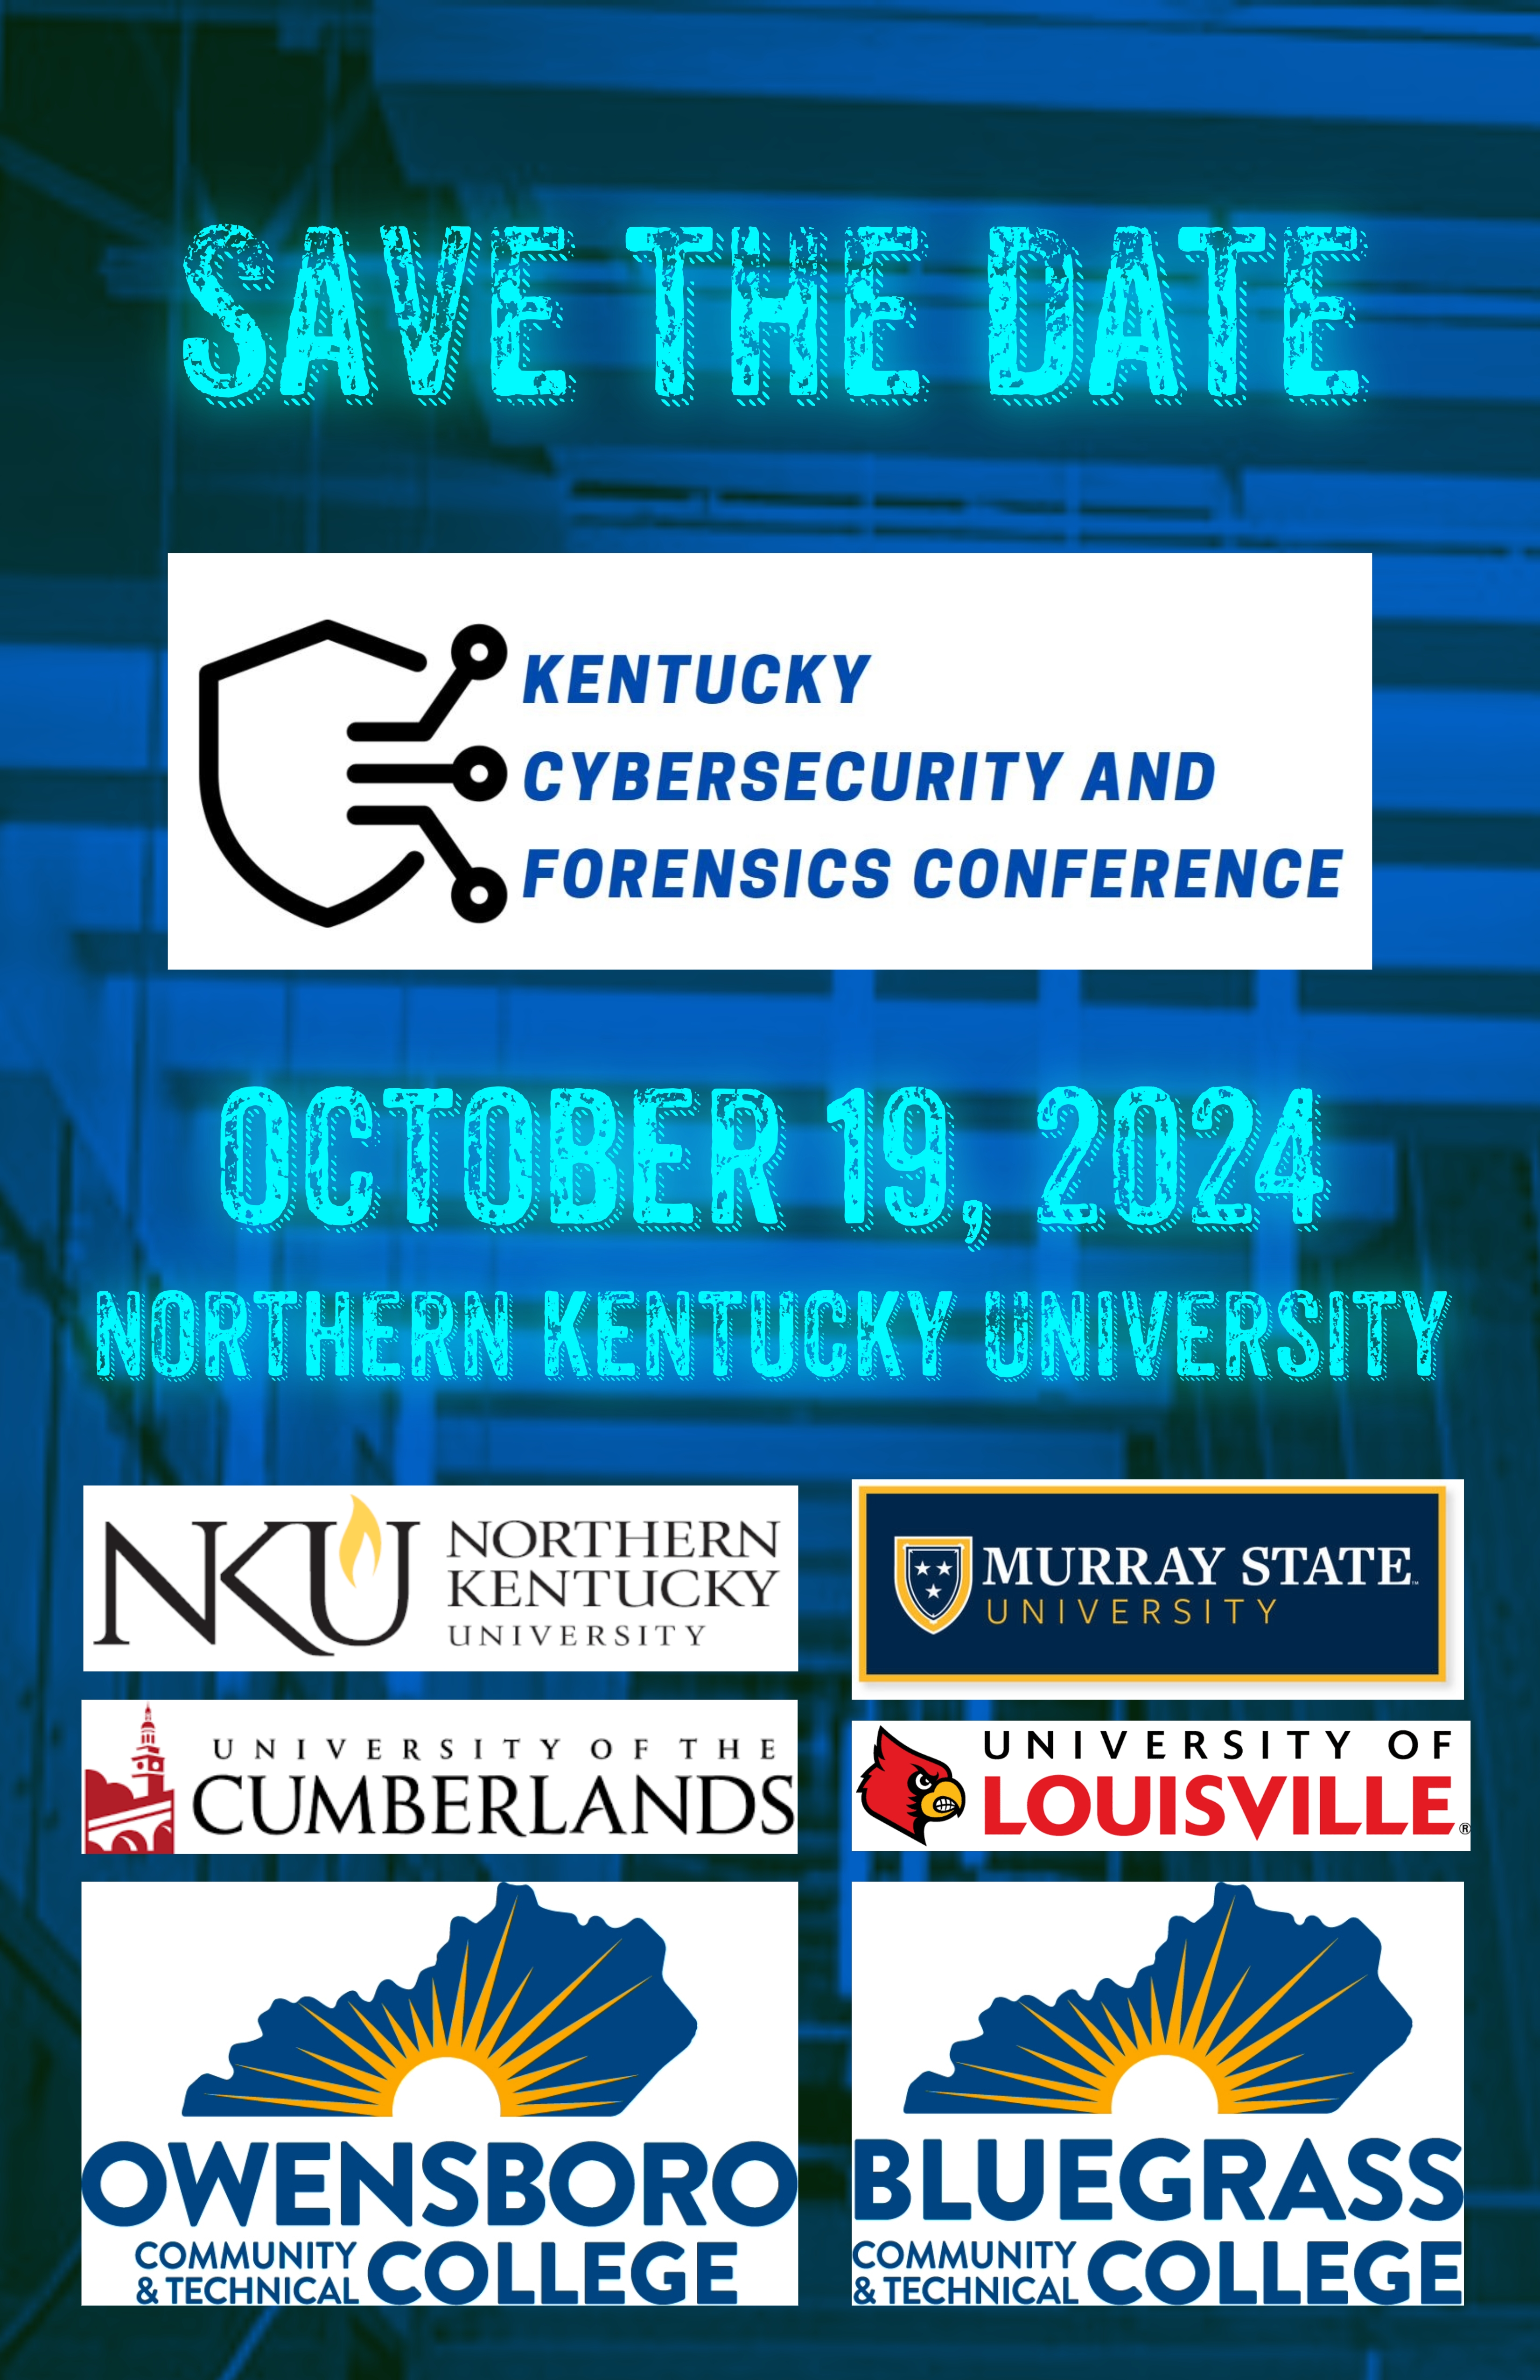 Kentucky Cybersecurity and Forensics Conference held on October 19th 2024 hosted by NKU